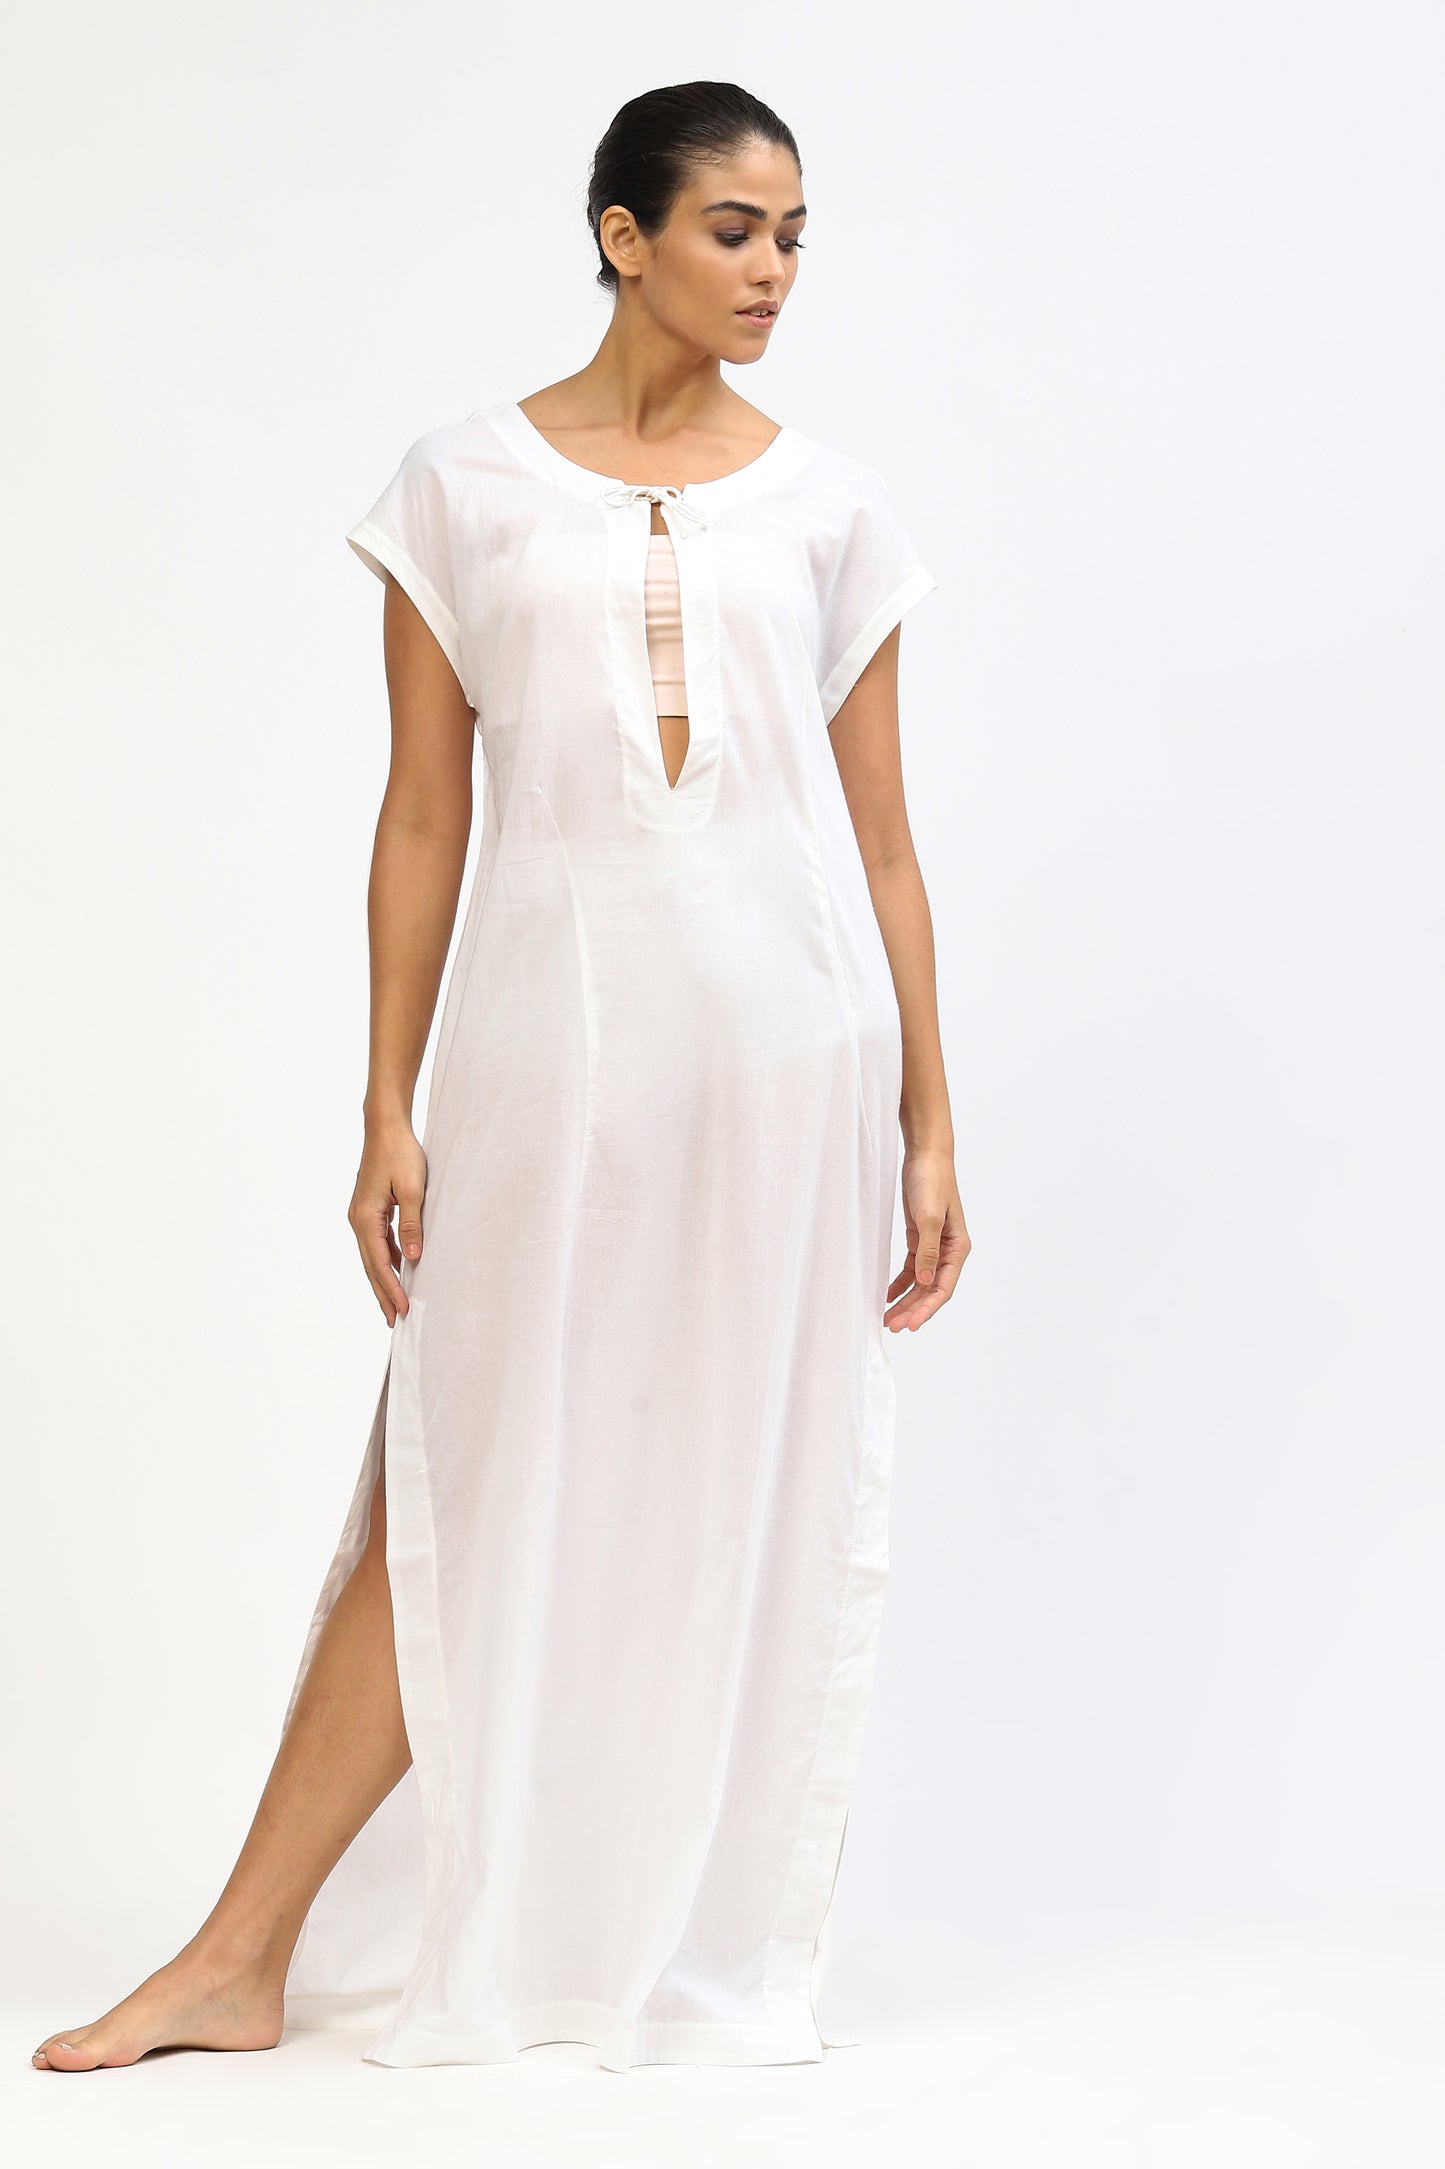 White Voile Cotton Long Dress With Neck Slit Detail